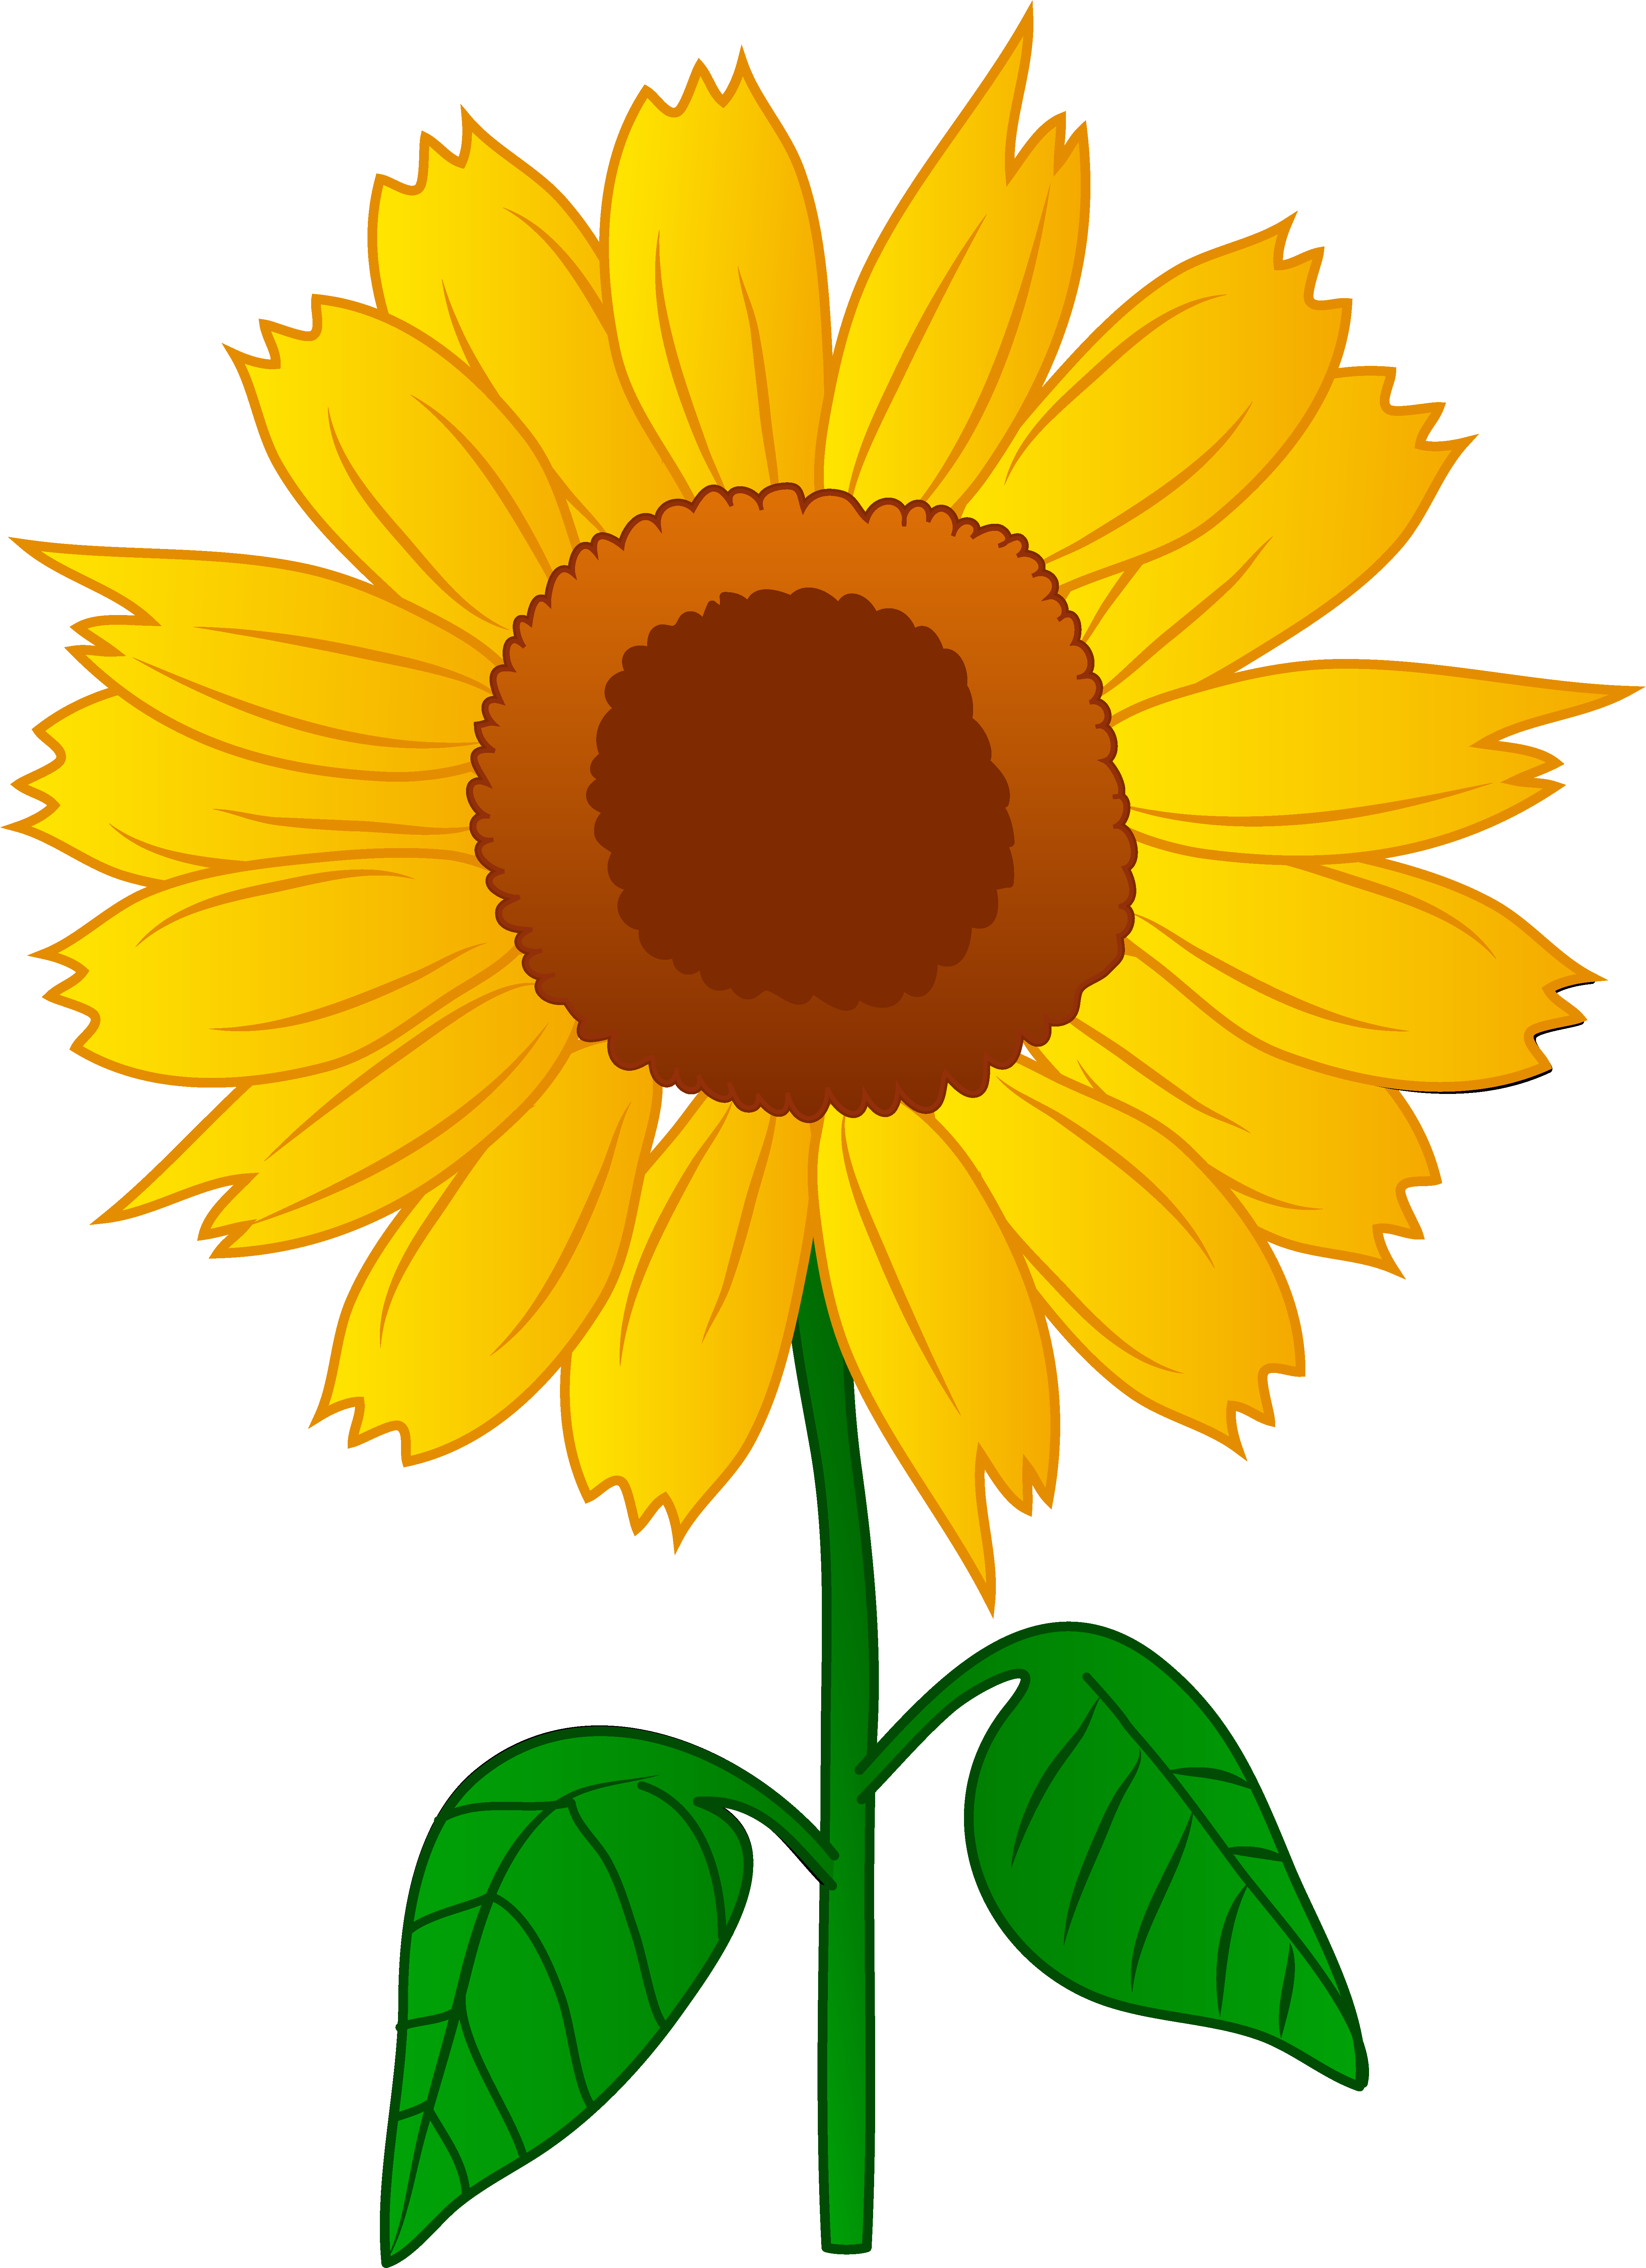 Sunflower Image Collection (42+)